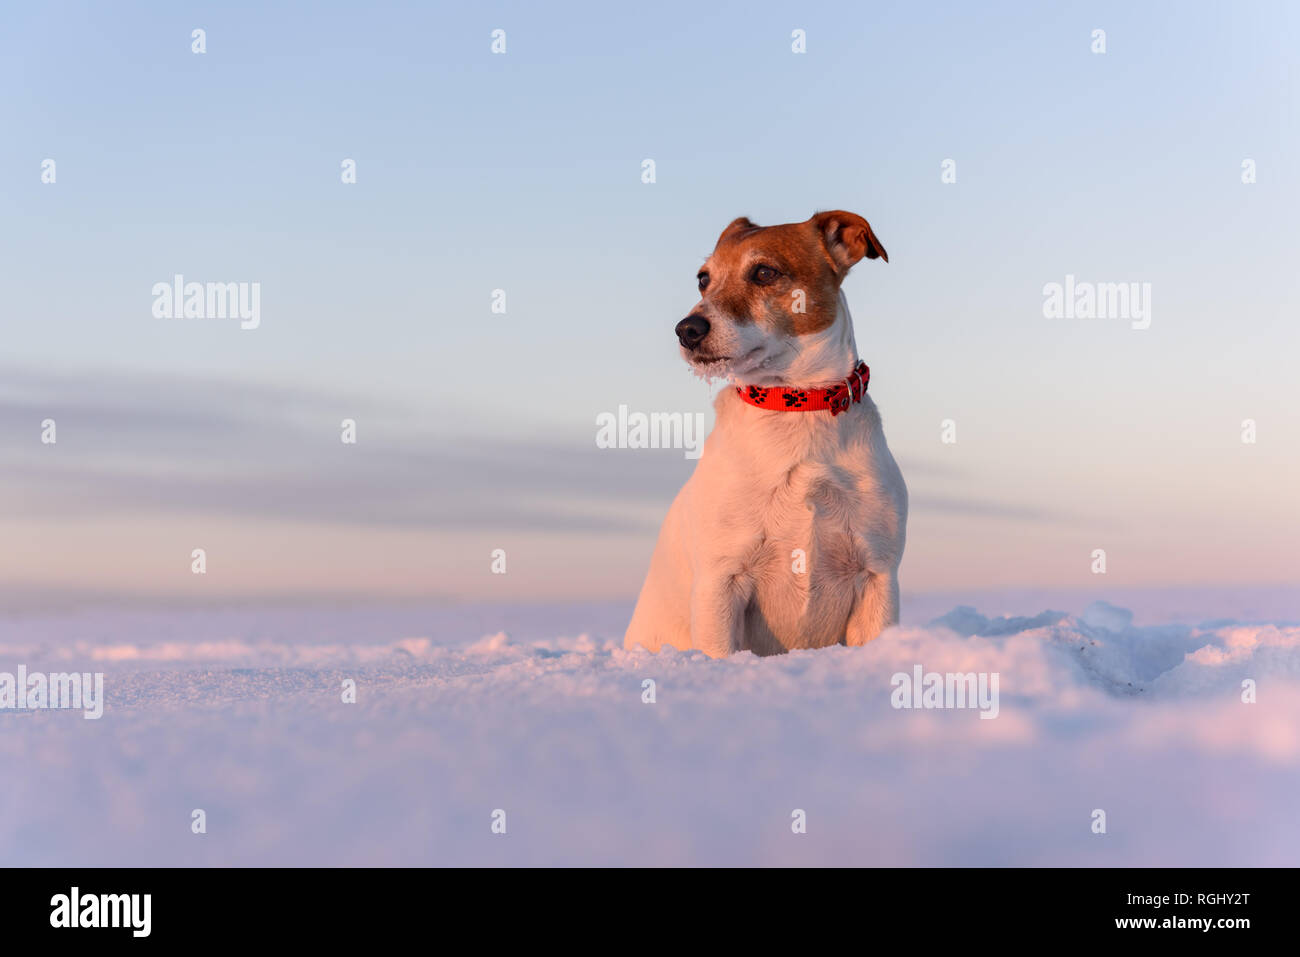 White jack russel terrier puppy on snowy field. Adult dog with serious gaze Stock Photo